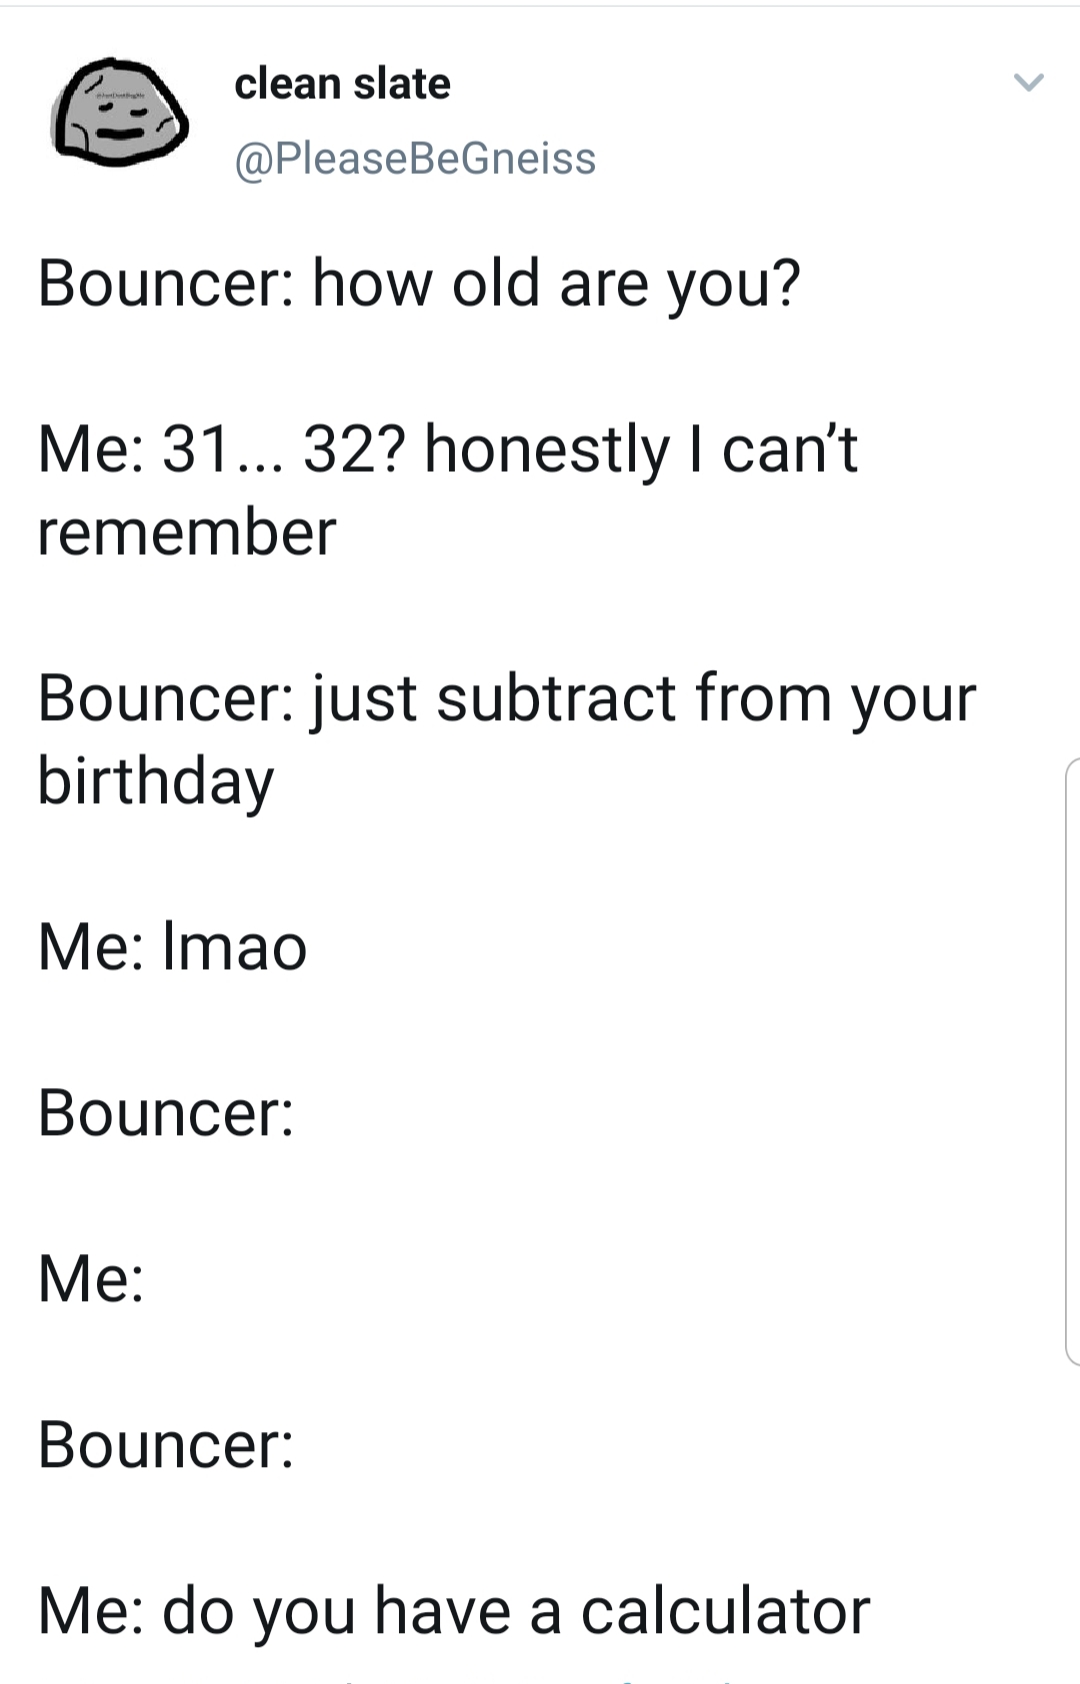 angle - clean slate Bouncer how old are you? Me 31... 32? honestly I can't remember Bouncer just subtract from your birthday Me Imao Bouncer Me Bouncer Me do you have a calculator